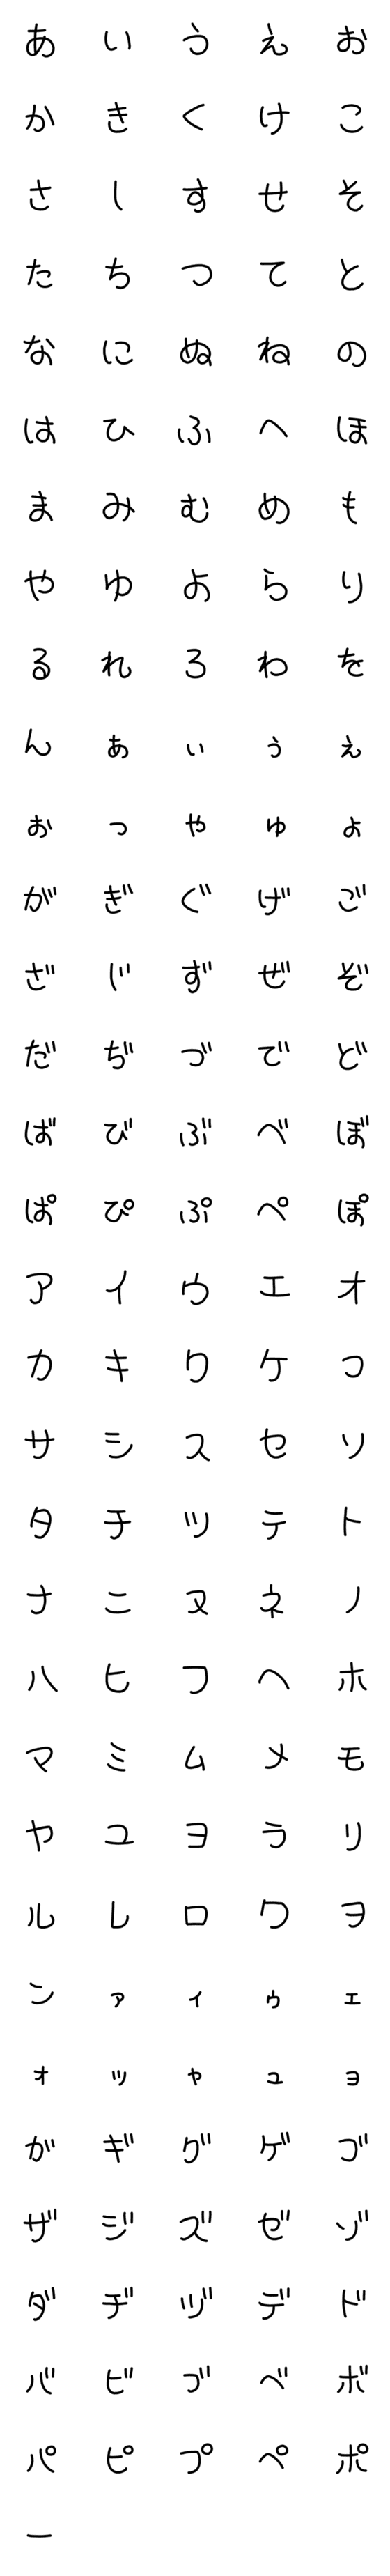 [LINE絵文字]ゆるっと文字の画像一覧